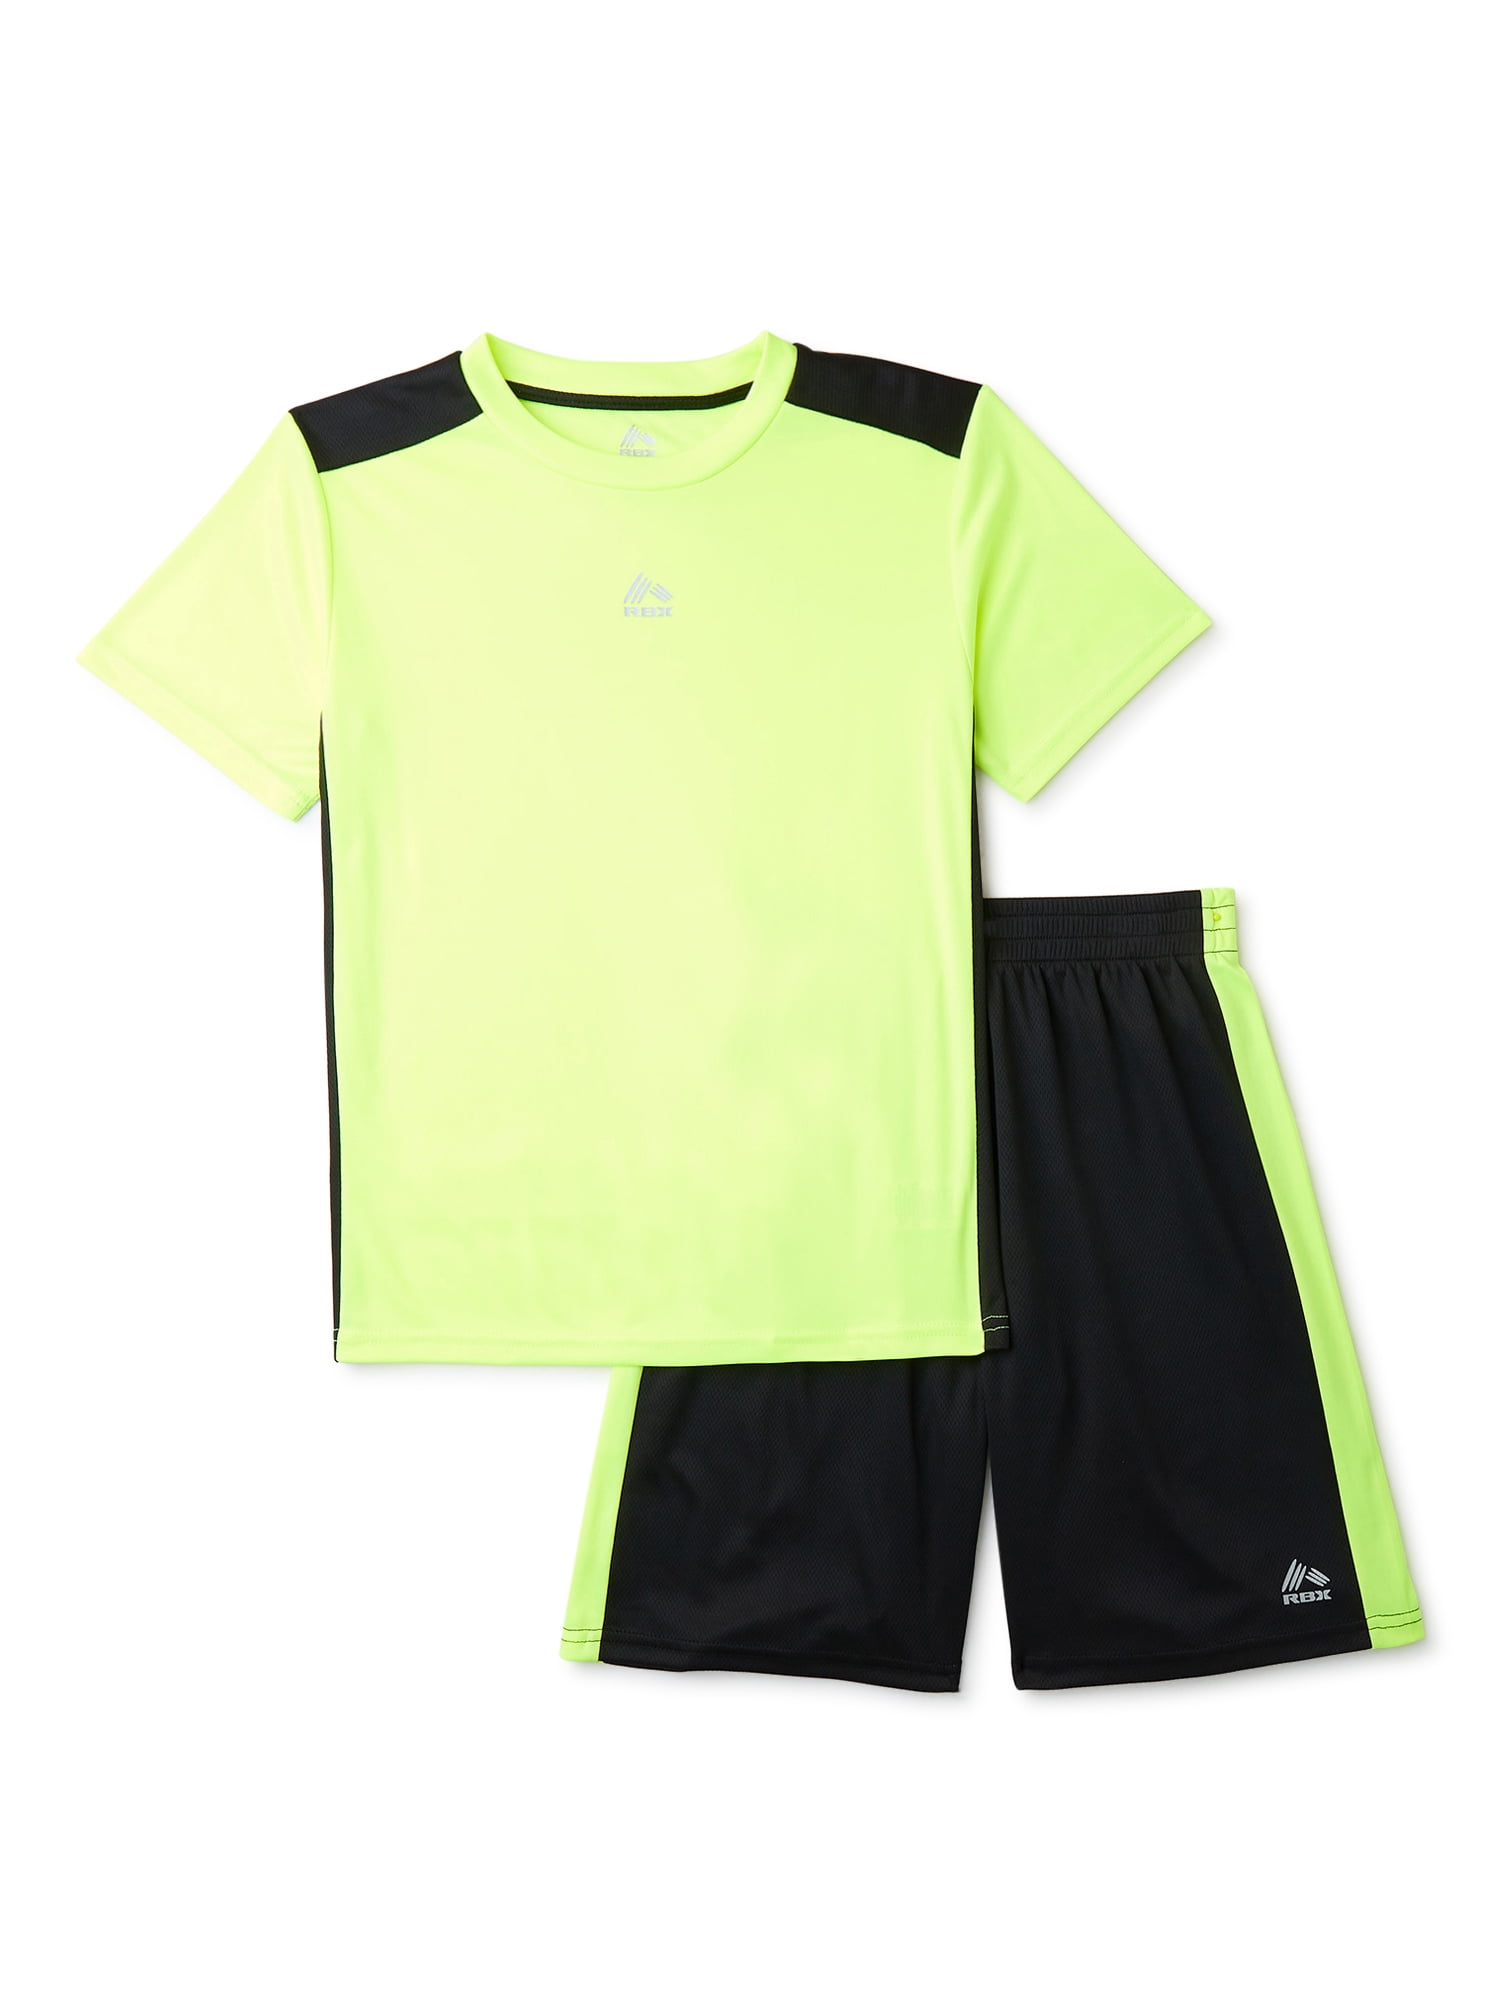 RBX Boys Neon Active T-Shirt and Shorts, 2-Piece Set, Sizes 4-12 ...